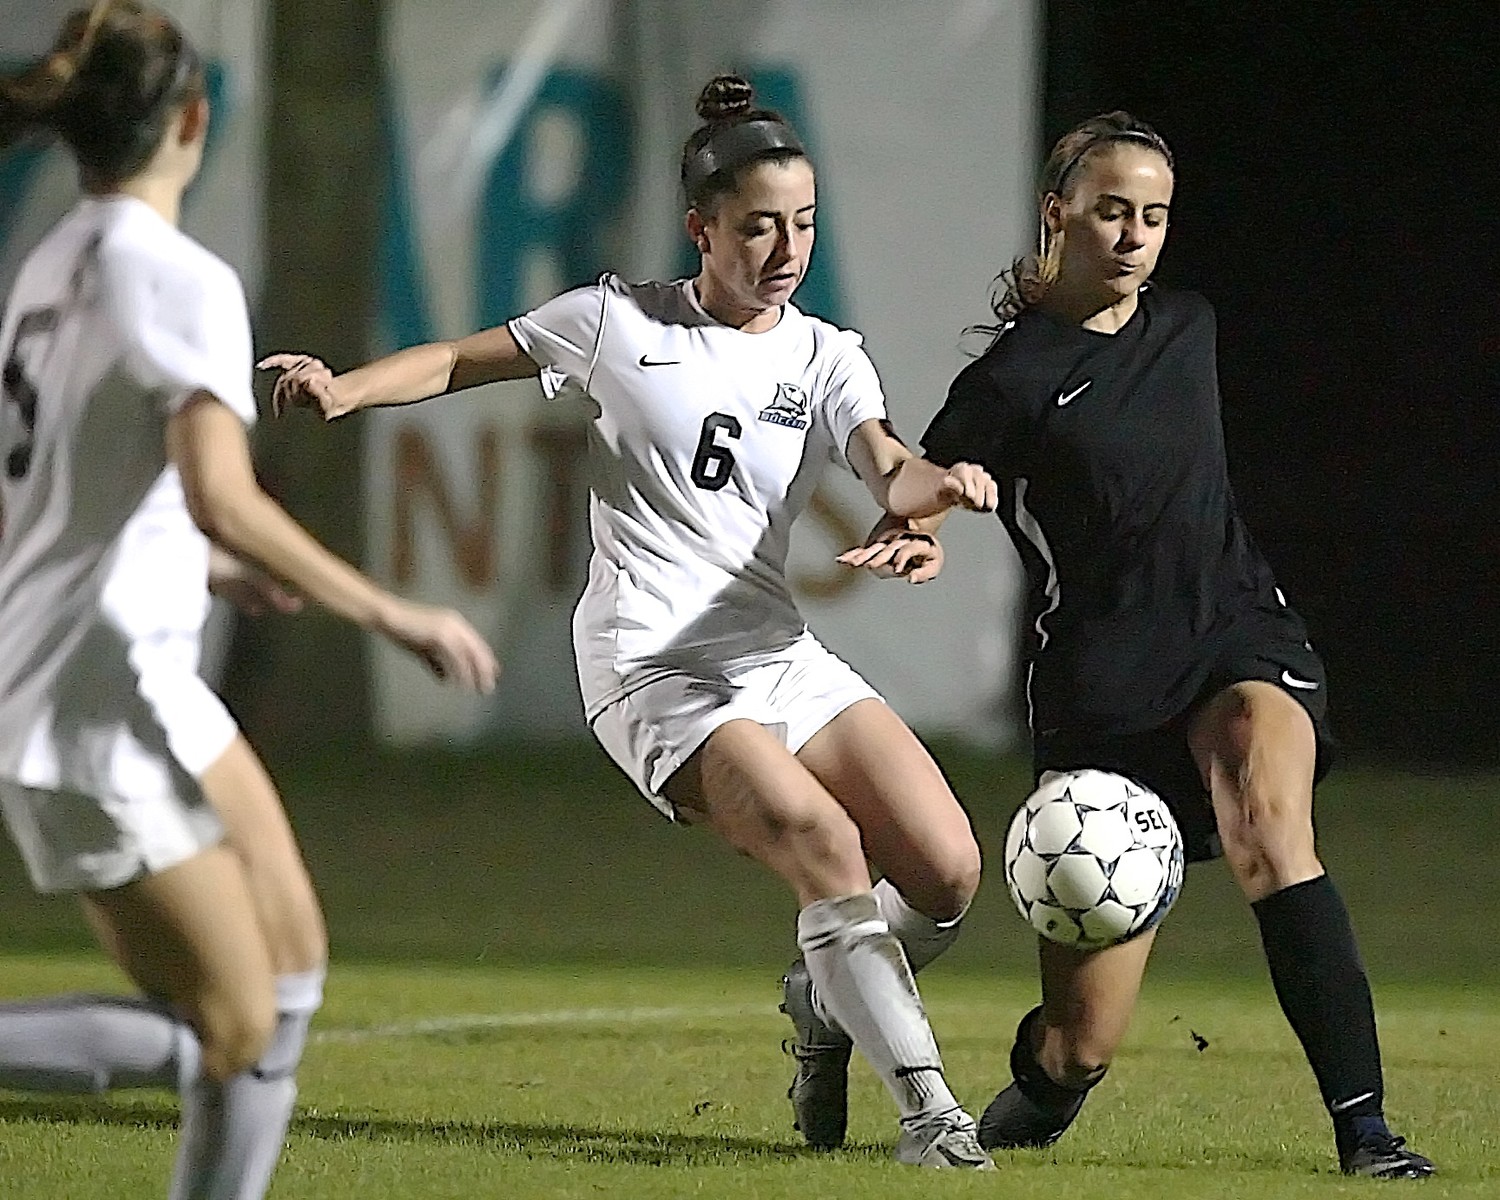 Molly Miller (6) attempts to gain control of the ball.